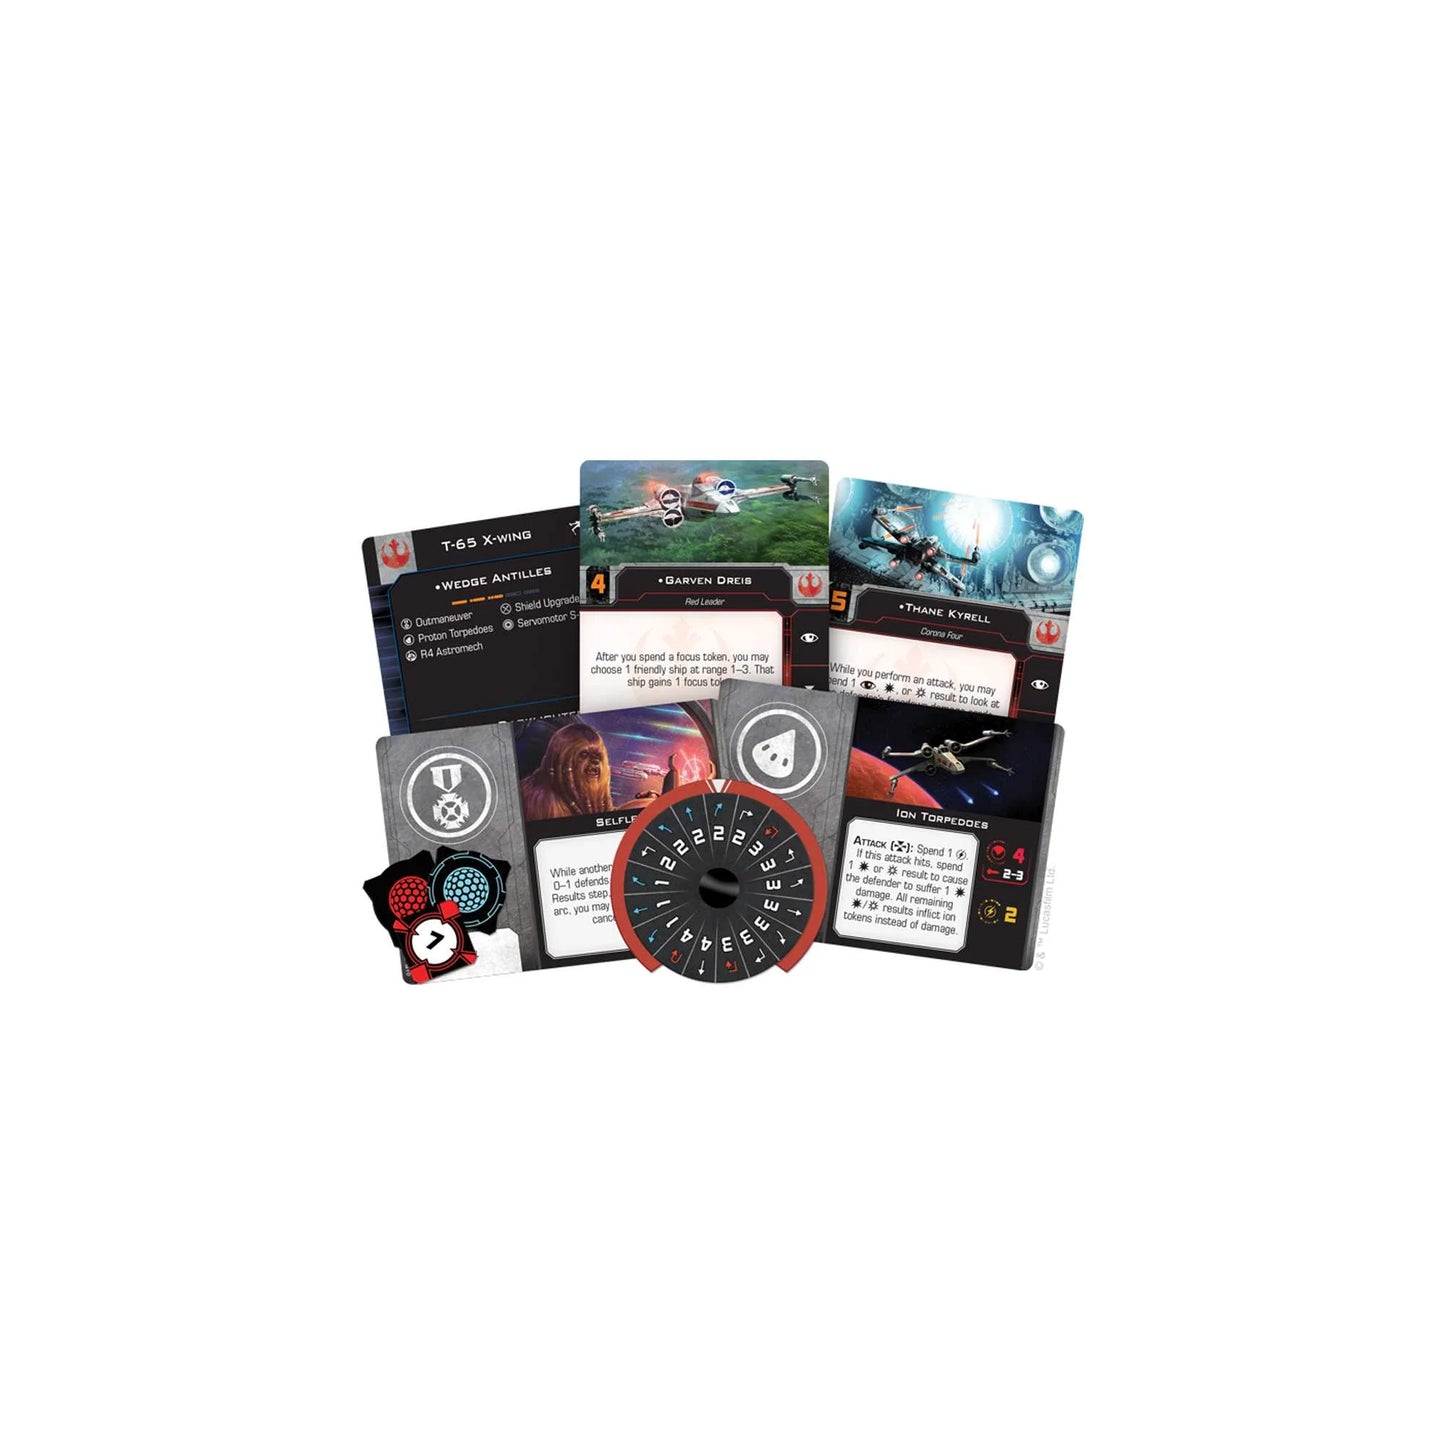 Star Wars: X-Wing - T-65 X-Wing Expansion Pack